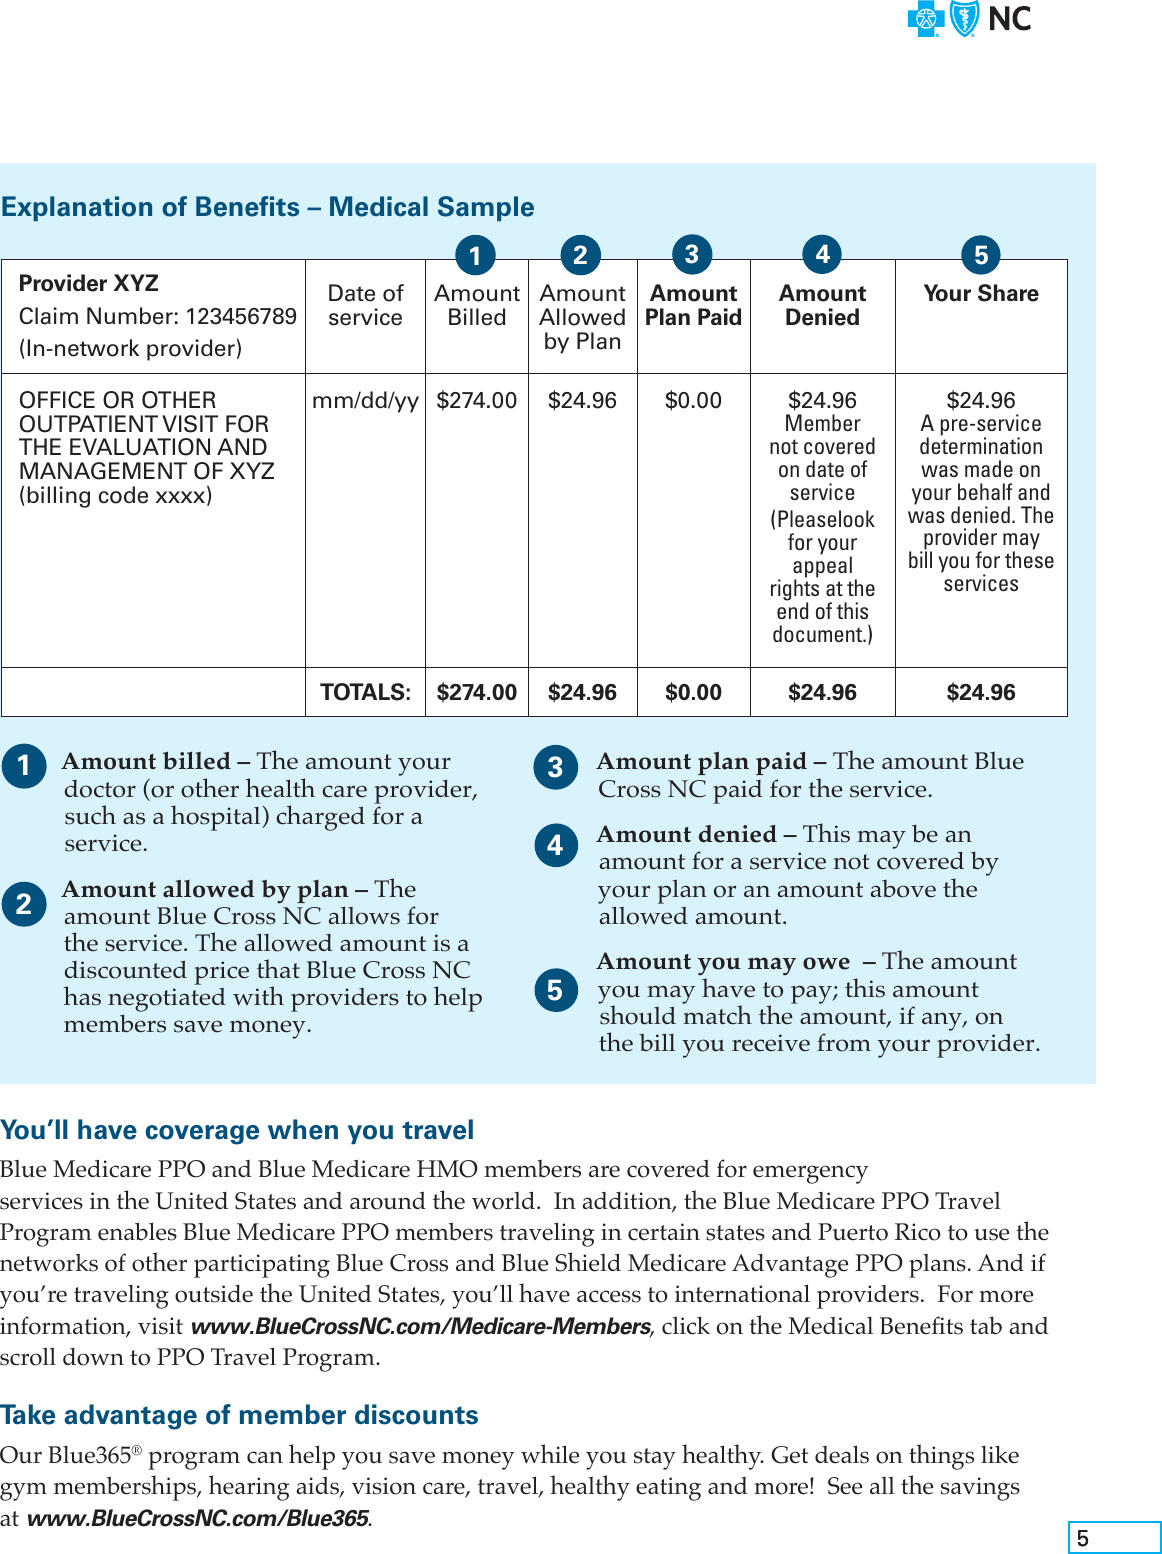 Page 5 of 8 - U14314-2018-Medicare-Advantage-Onboarding-Guide-r001